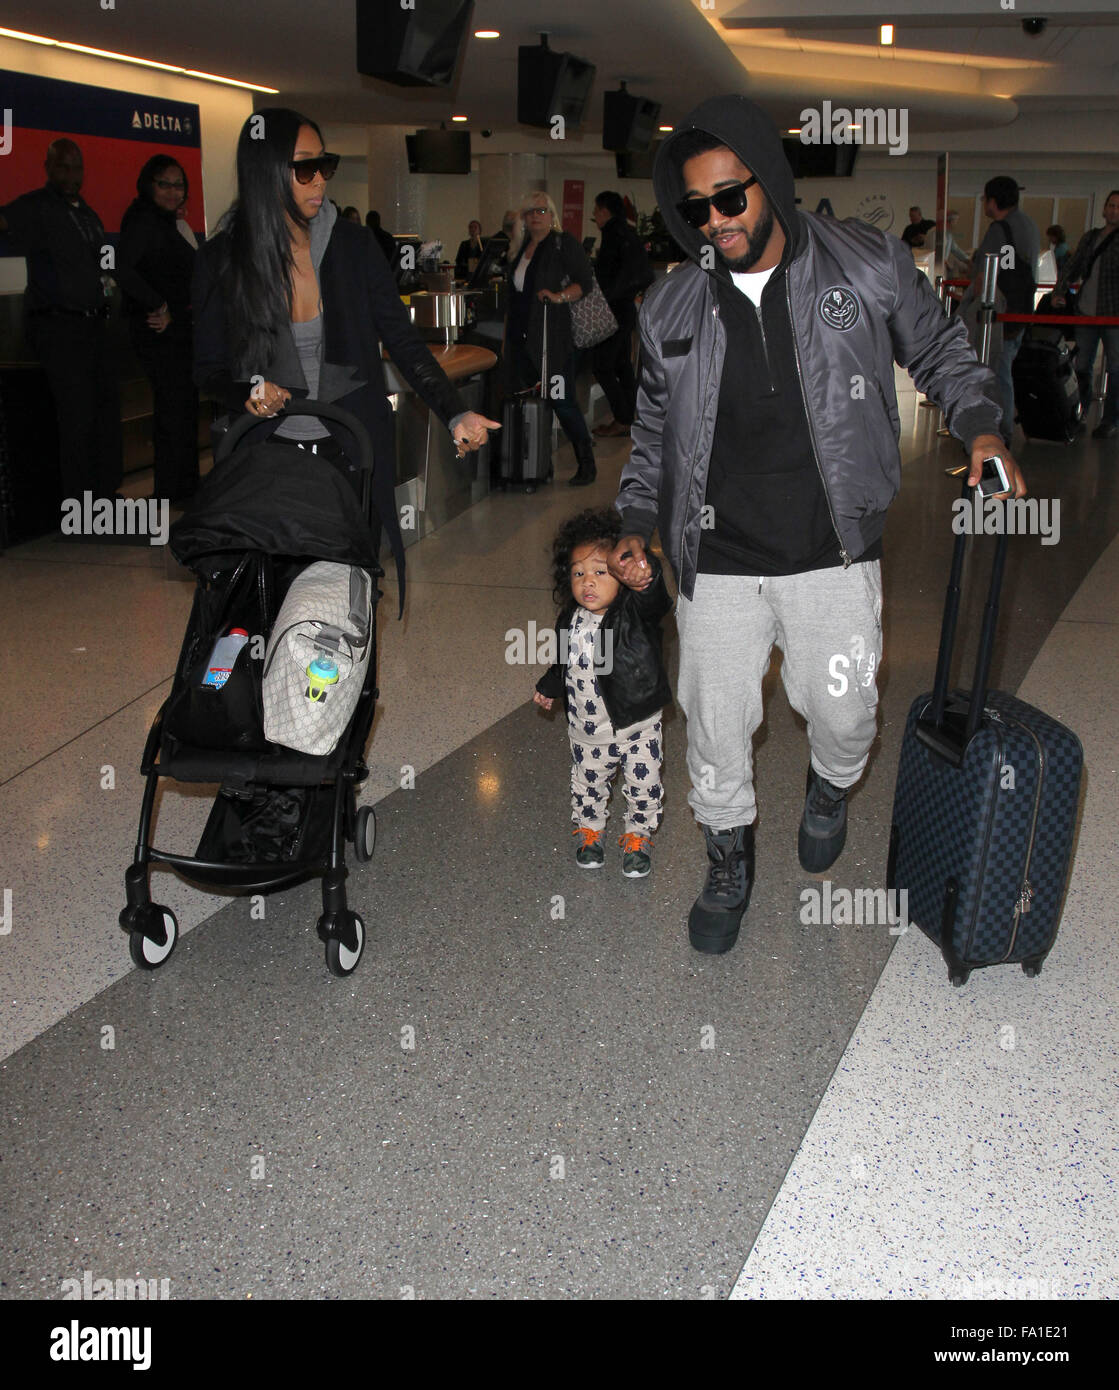 Lead singer of R&B boy band B2K, Omarion departs on a flight from Los Angeles International Airport (LAX) with family  Featuring: Omari Grandberry, Omarion, Apryl Jones, Megaa Omari Where: Los Angeles , California, United States When: 18 Nov 2015 Stock Photo